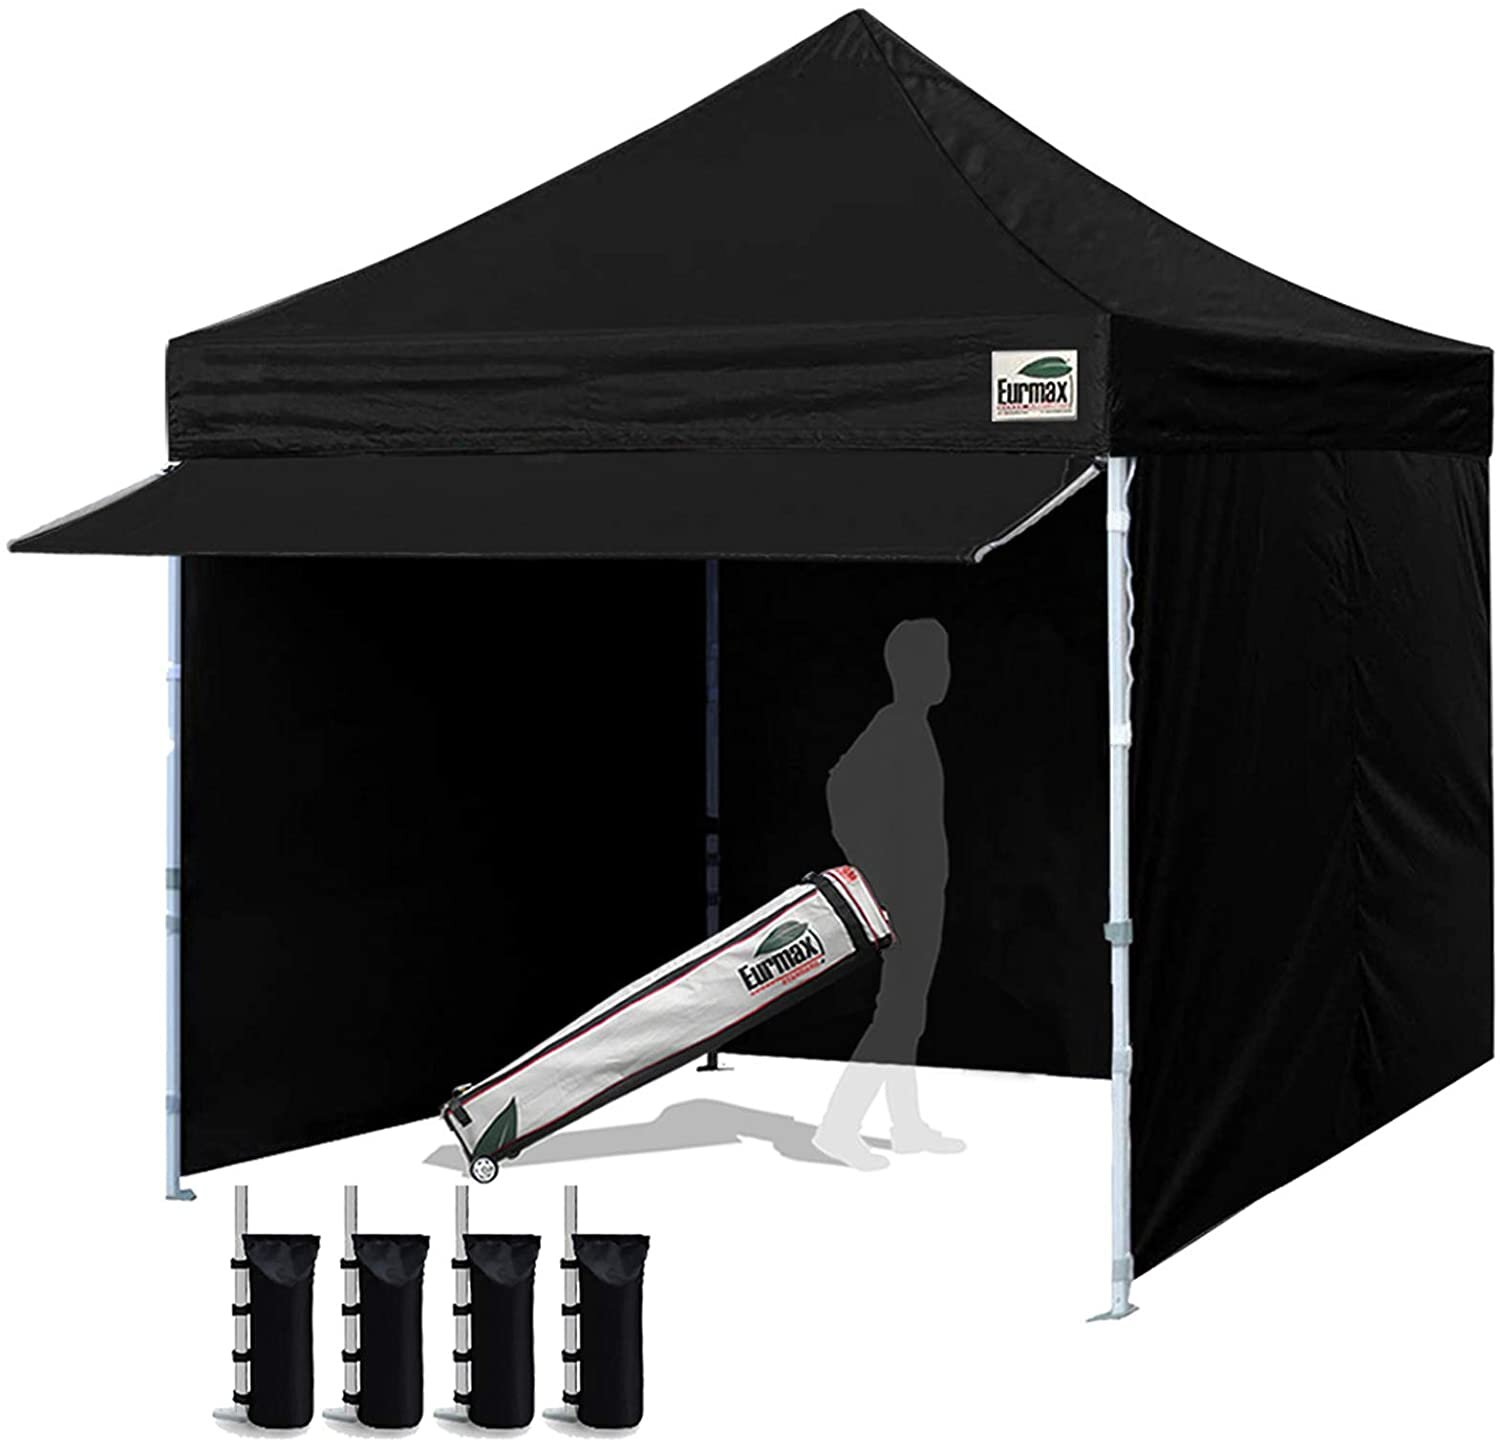 Eurmax 8x8 Portable Event Canopy Water-proof Party Tent Shade Select Color 